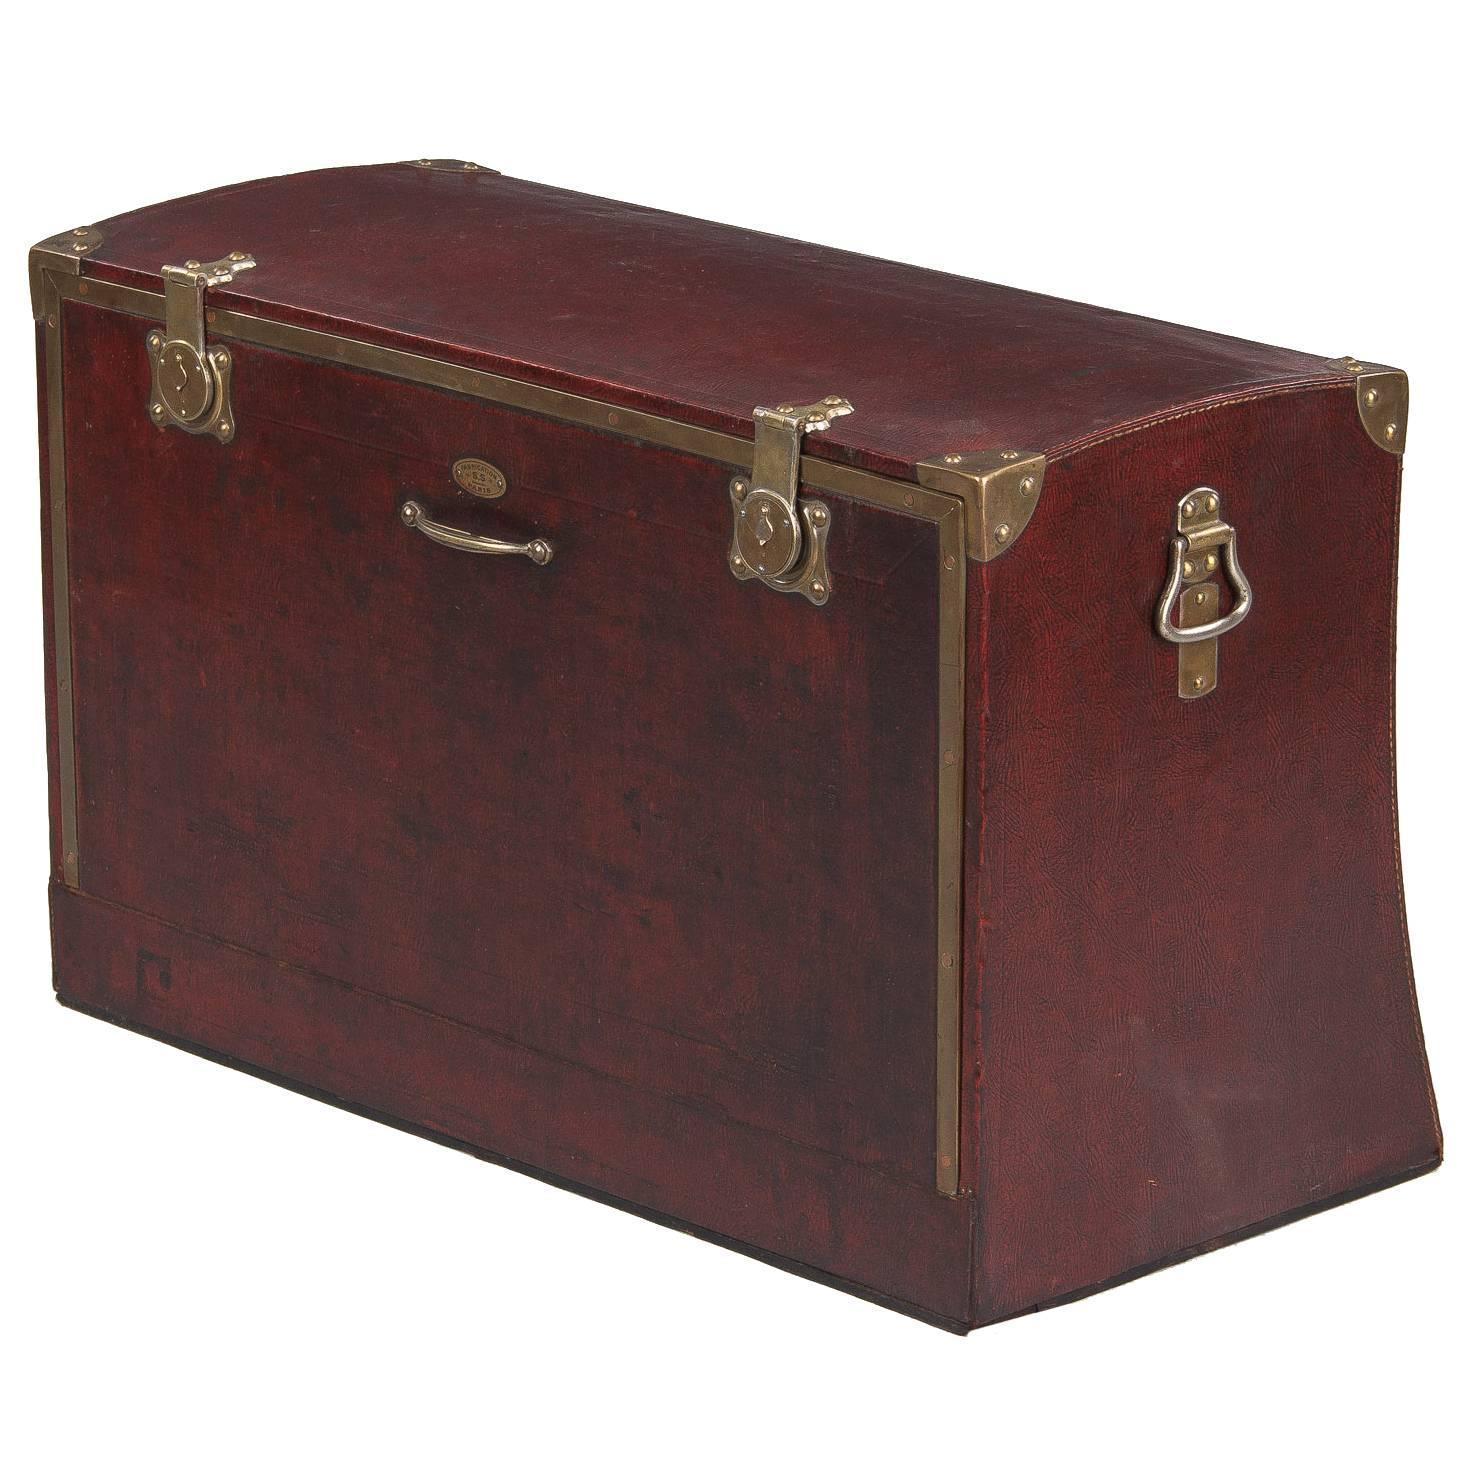 Antique French Automobile Leather Trunk, circa 1900s For Sale at 1stdibs